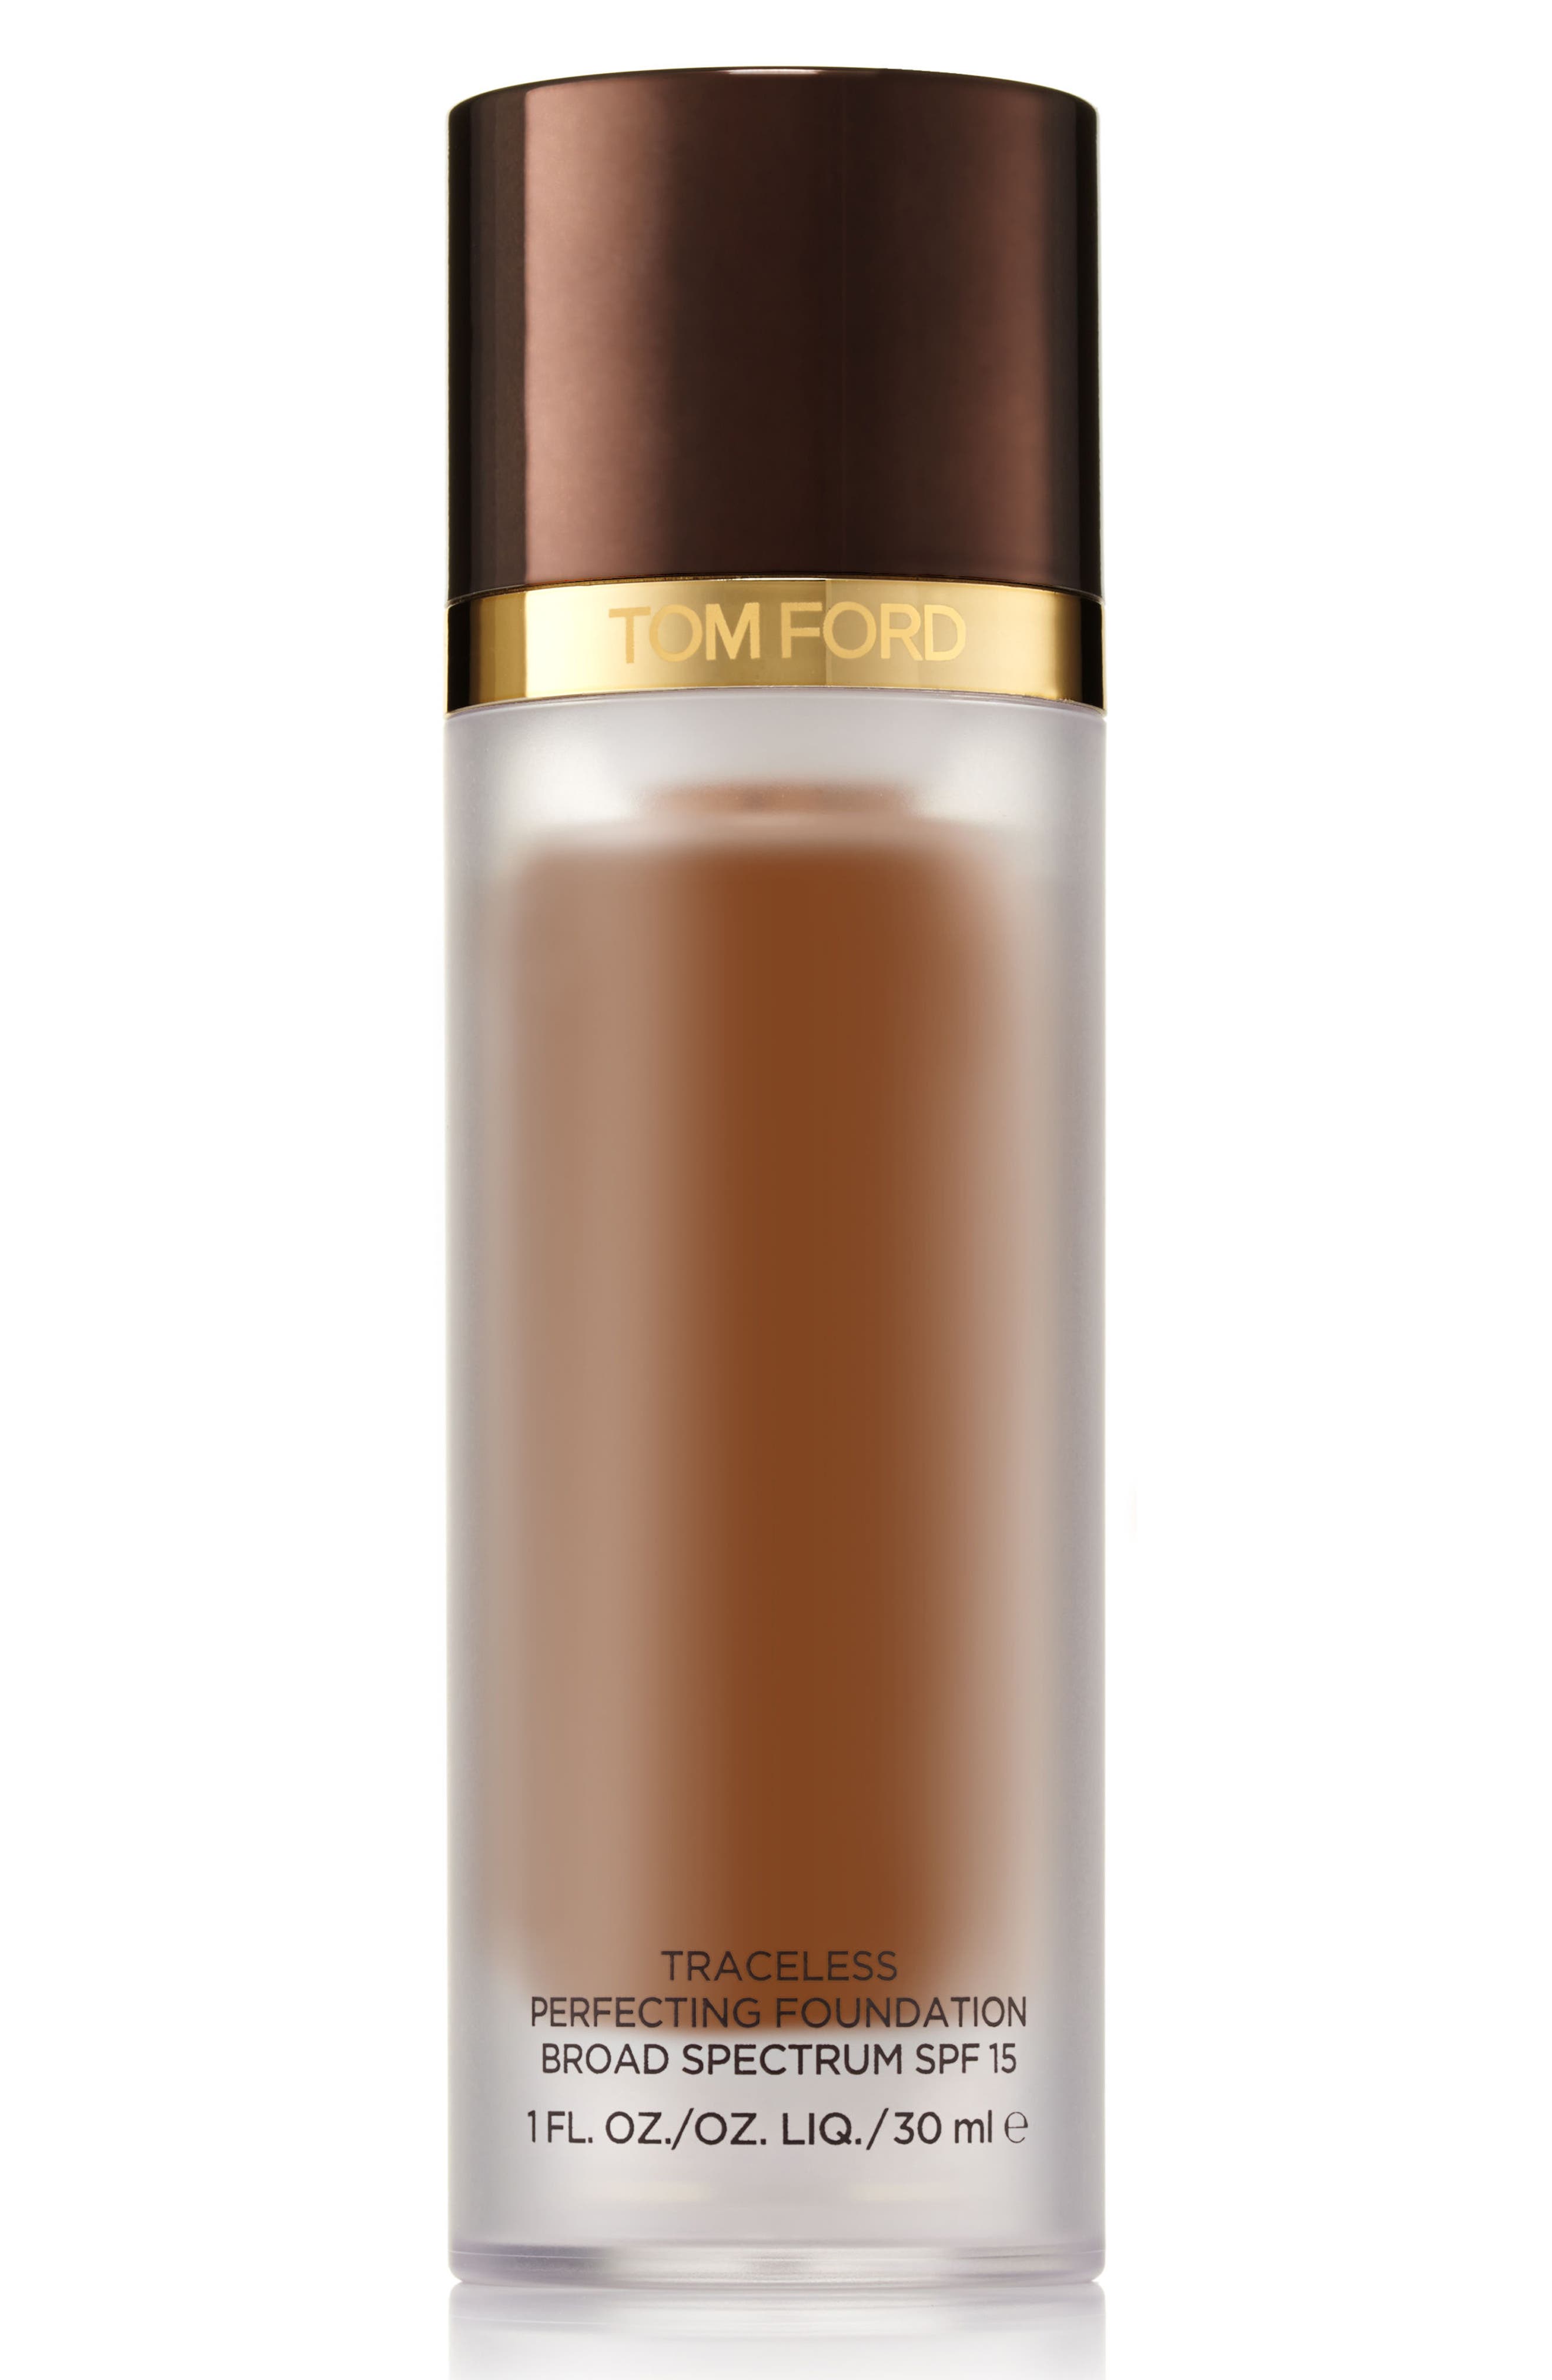 Tom Ford Traceless Perfecting Foundation SPF 15 in 11.0 Dusk at Nordstrom